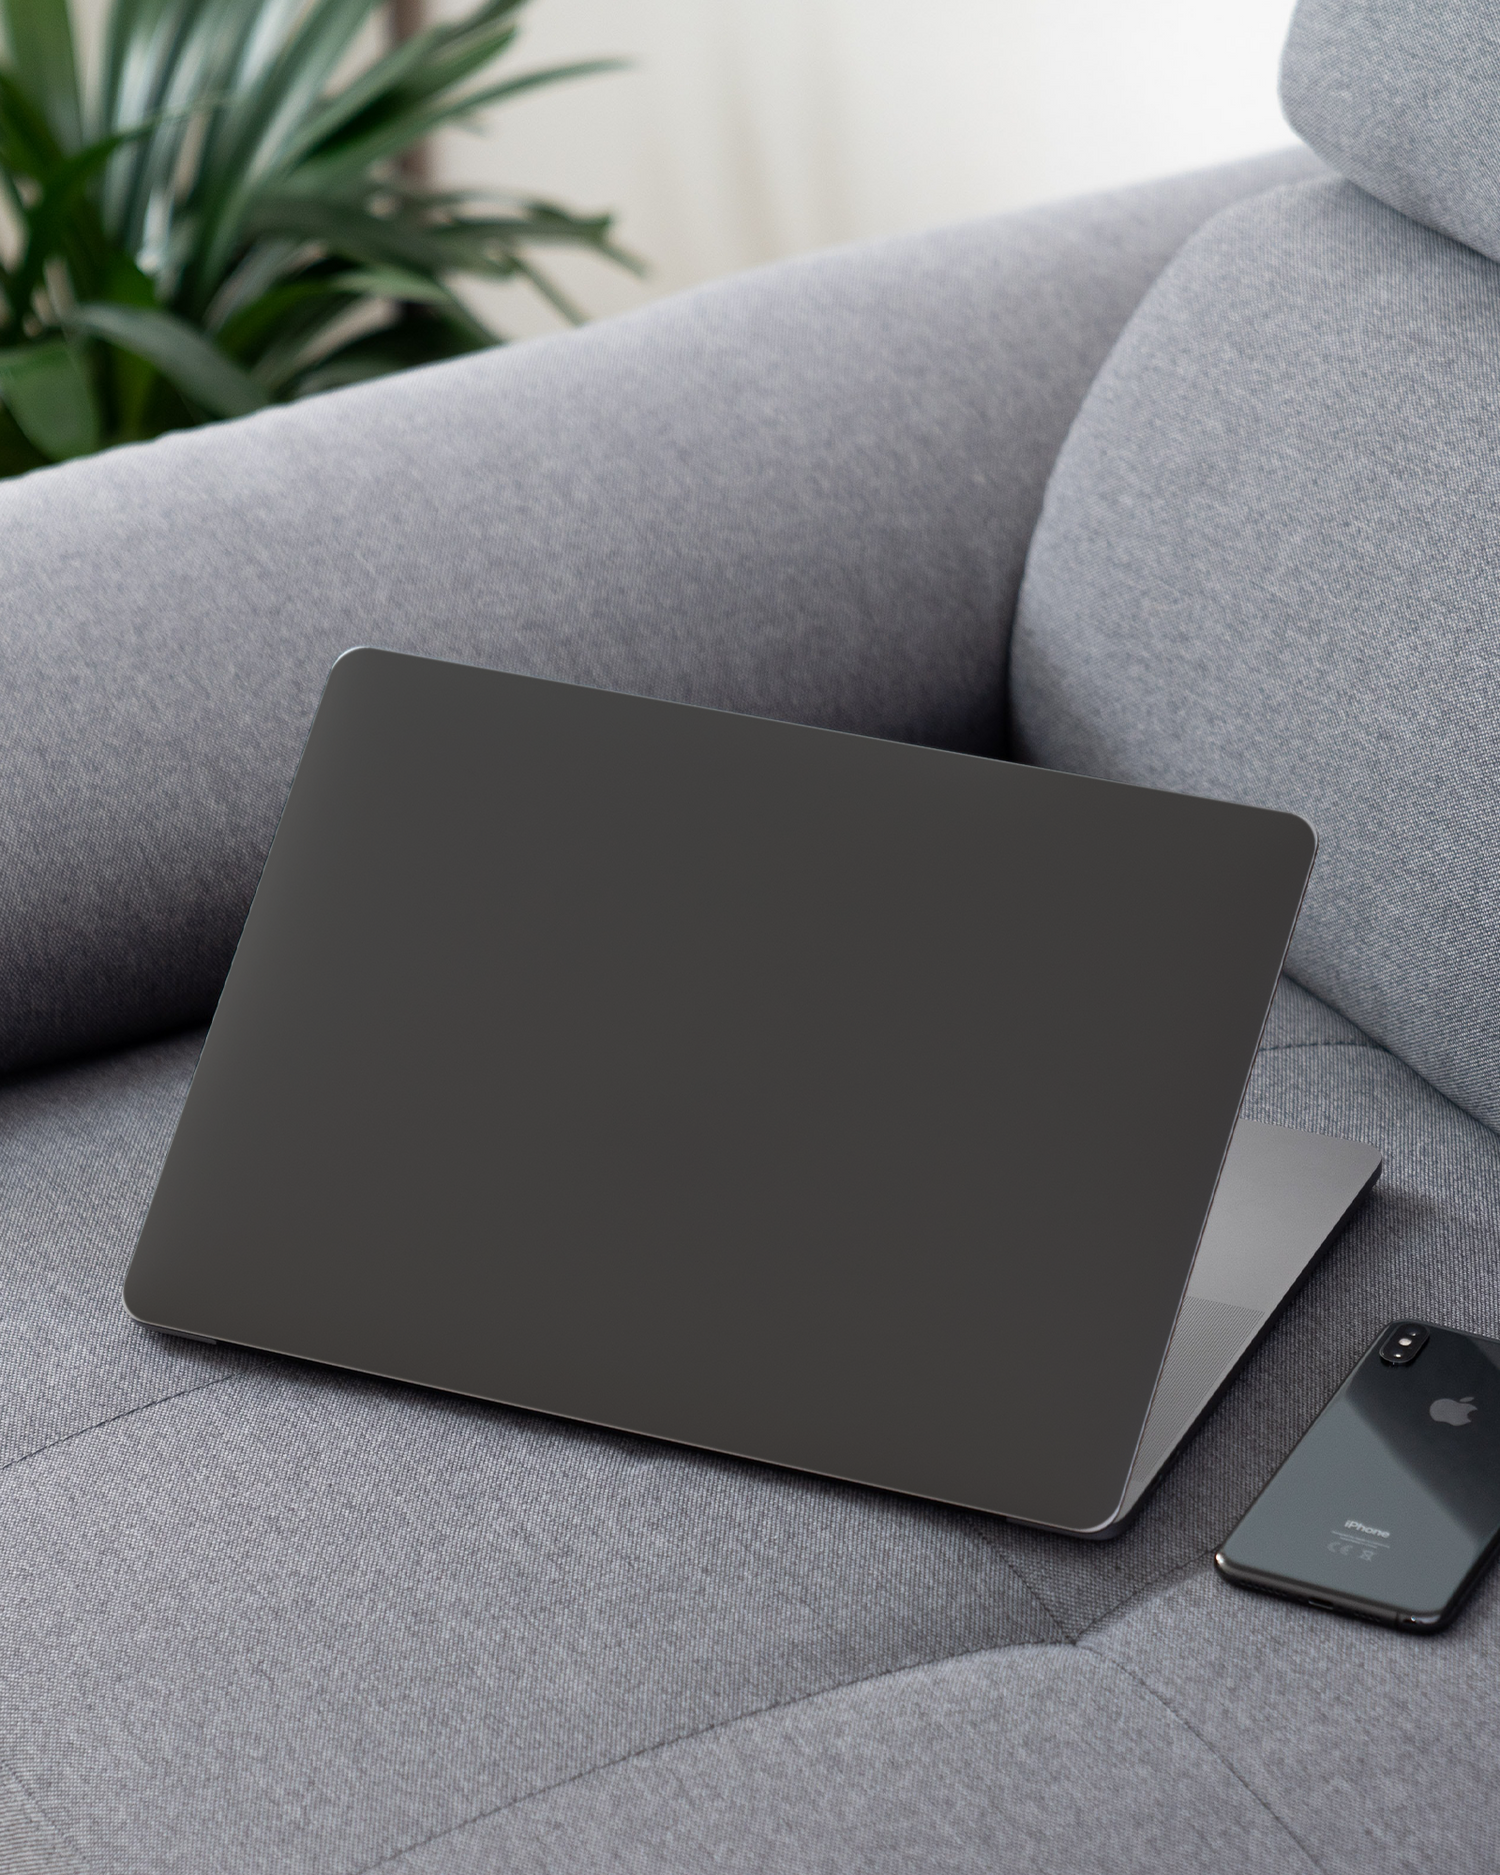 SPACE GREY Laptop Skin for 13 inch Apple MacBooks on a couch